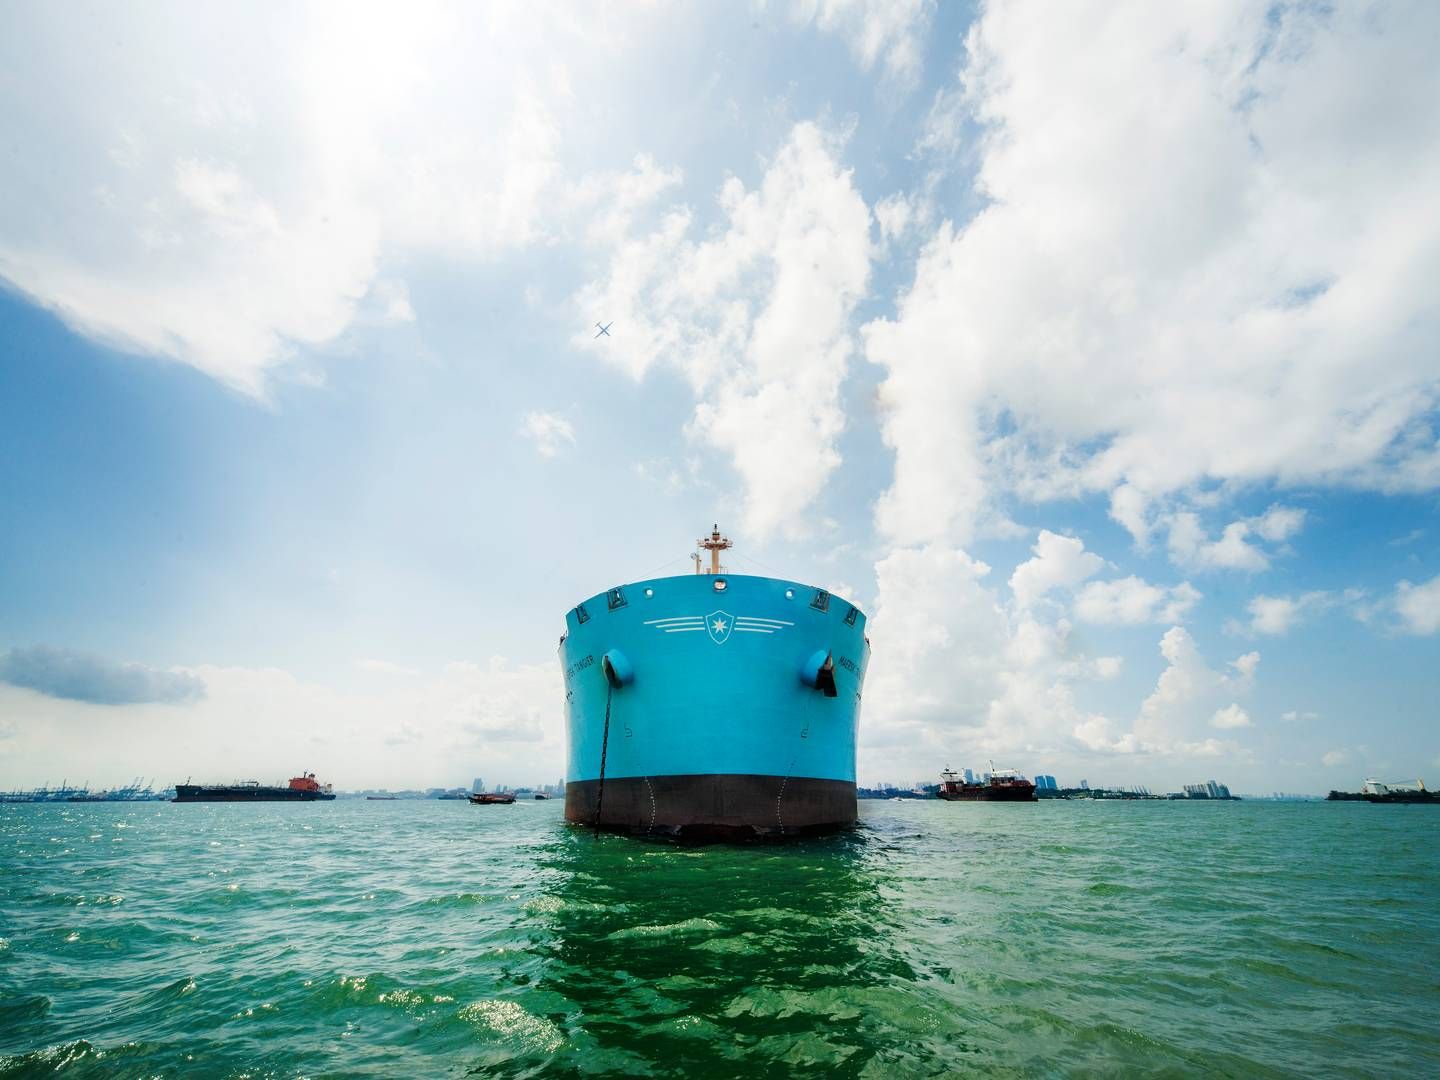 Archival image. Shows a Maersk Tankers vessel, but not Maersk Magellan. | Photo: Pr / Maersk Tankers